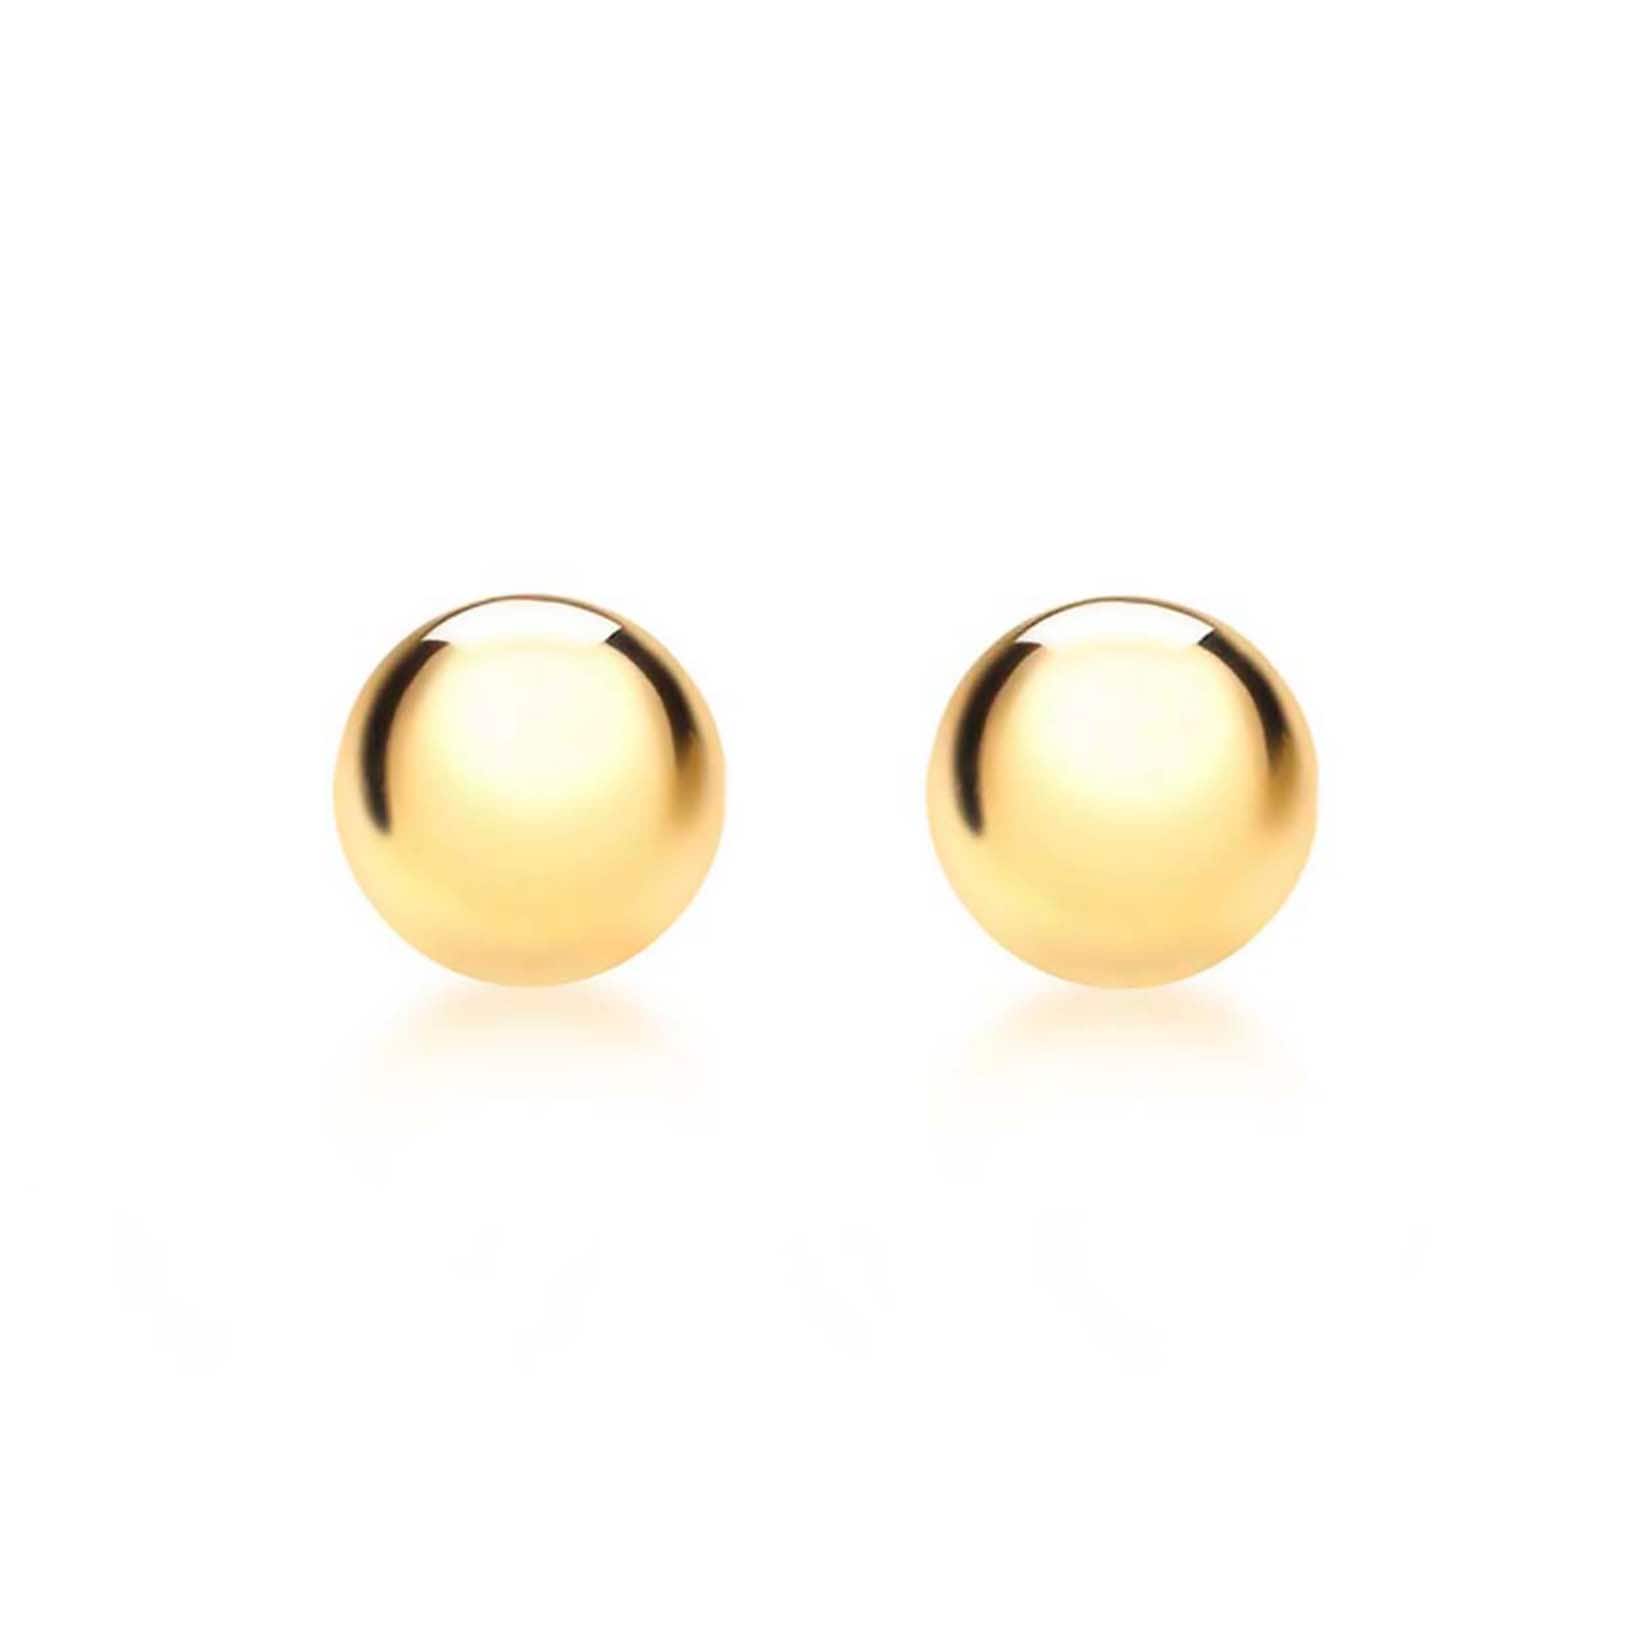 Buy Next Level Jewelry14K Yellow Gold Polished Ball Stud Earrings 3MM   8MM Gold Ball Earrings for Women Gold Stud Earrings for Women 14K Real  Gold Gold Post Earrings 100 Real 14K